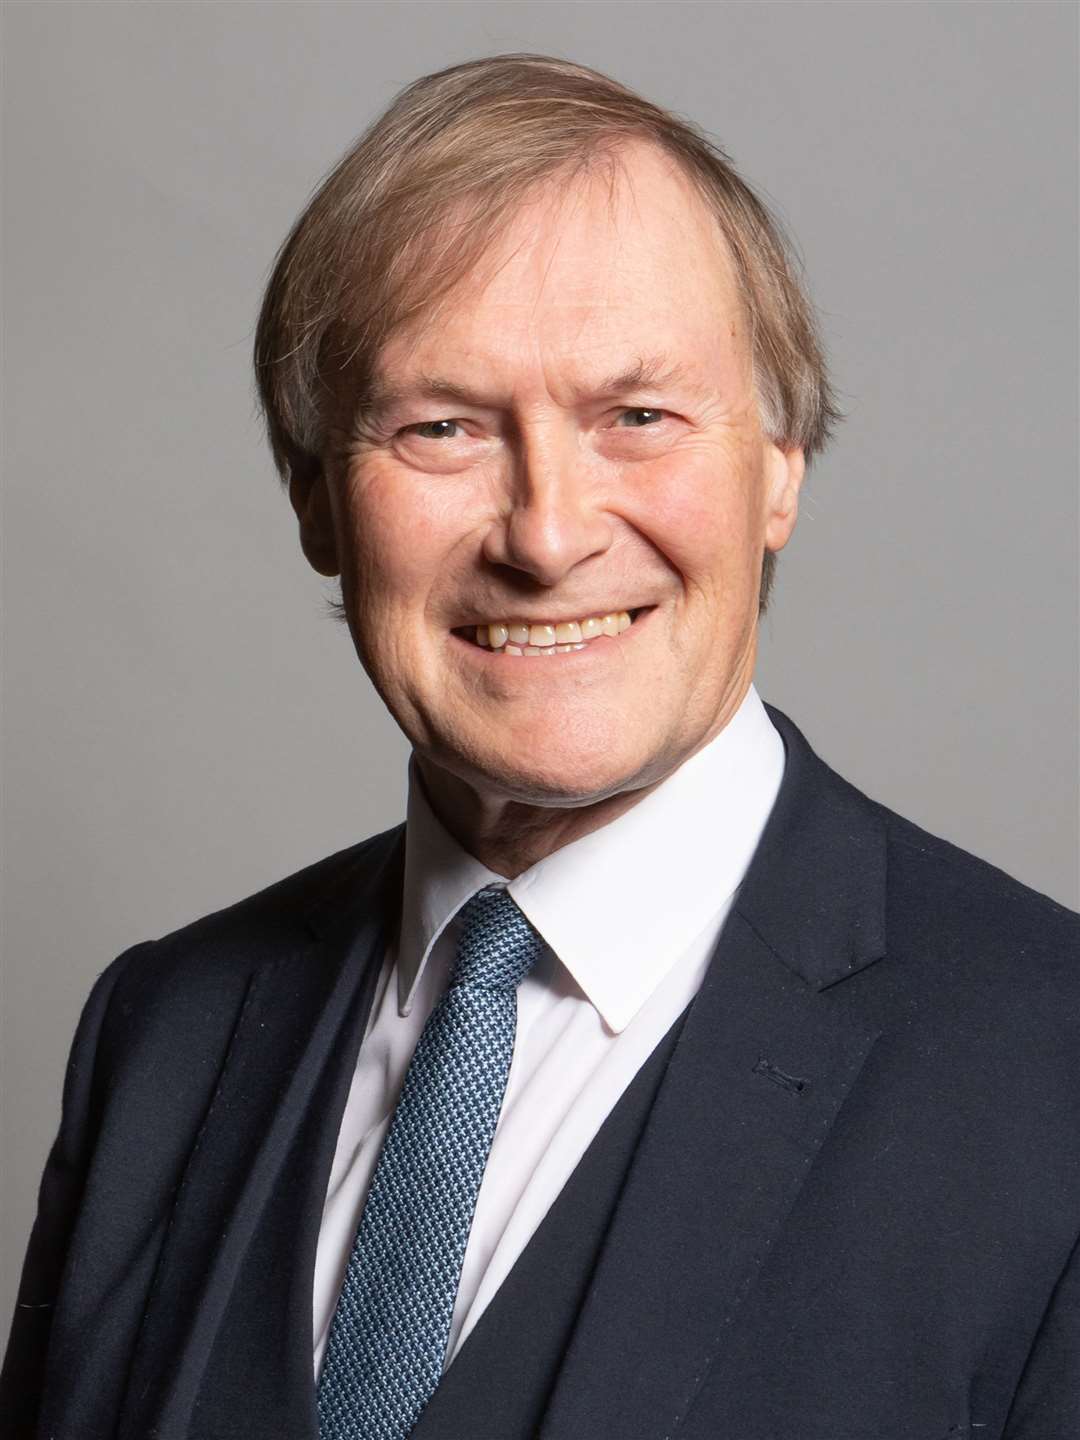 Sir David Amess was murdered during a constituency surgery in October 2021 (Chris McAndrew/PA)